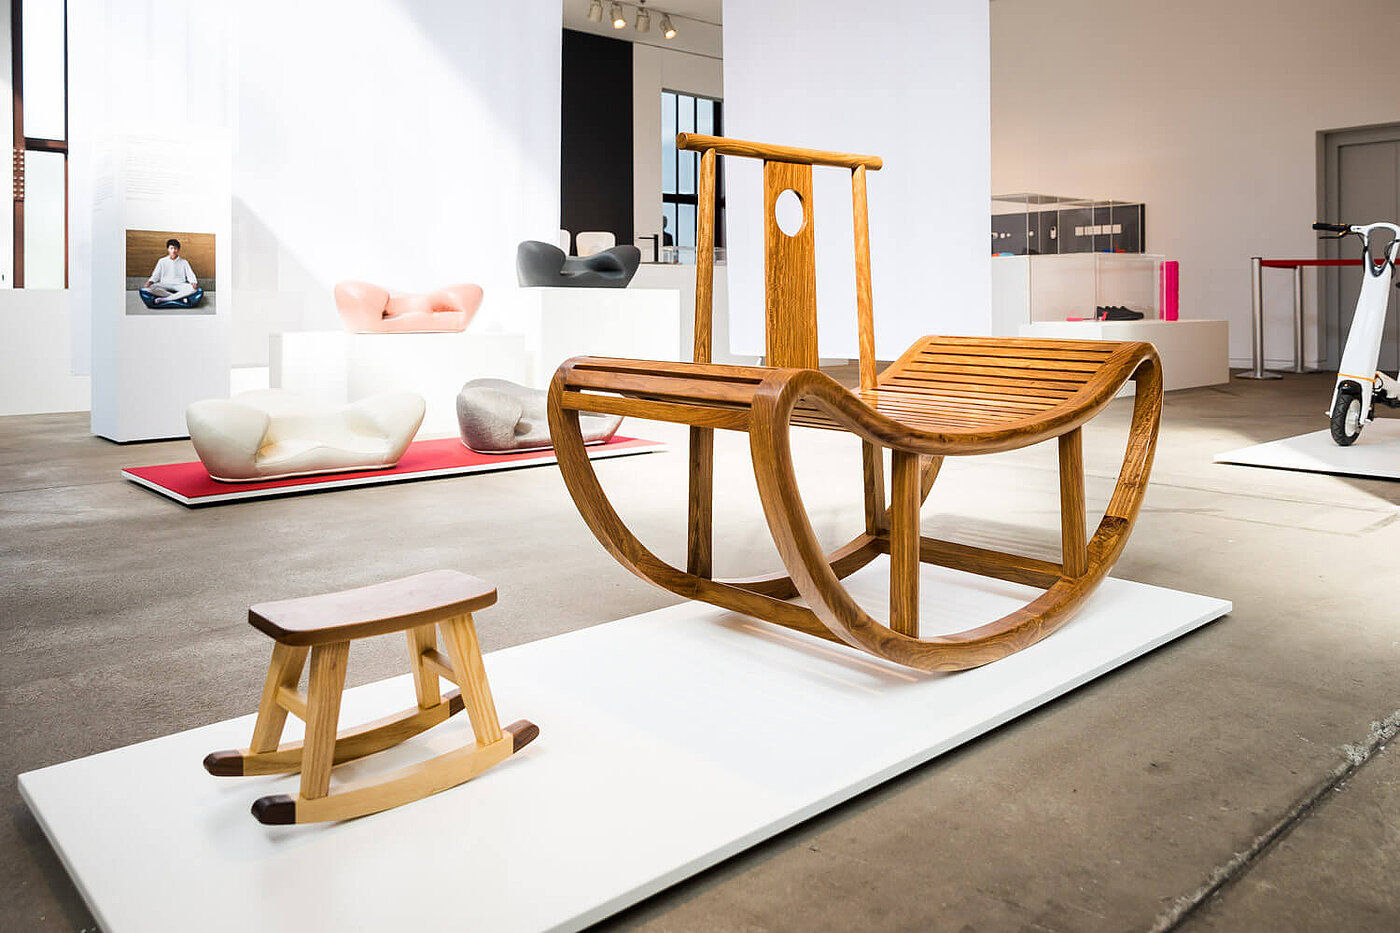 China Good Design: New Asian Moods and Award-Winning Products